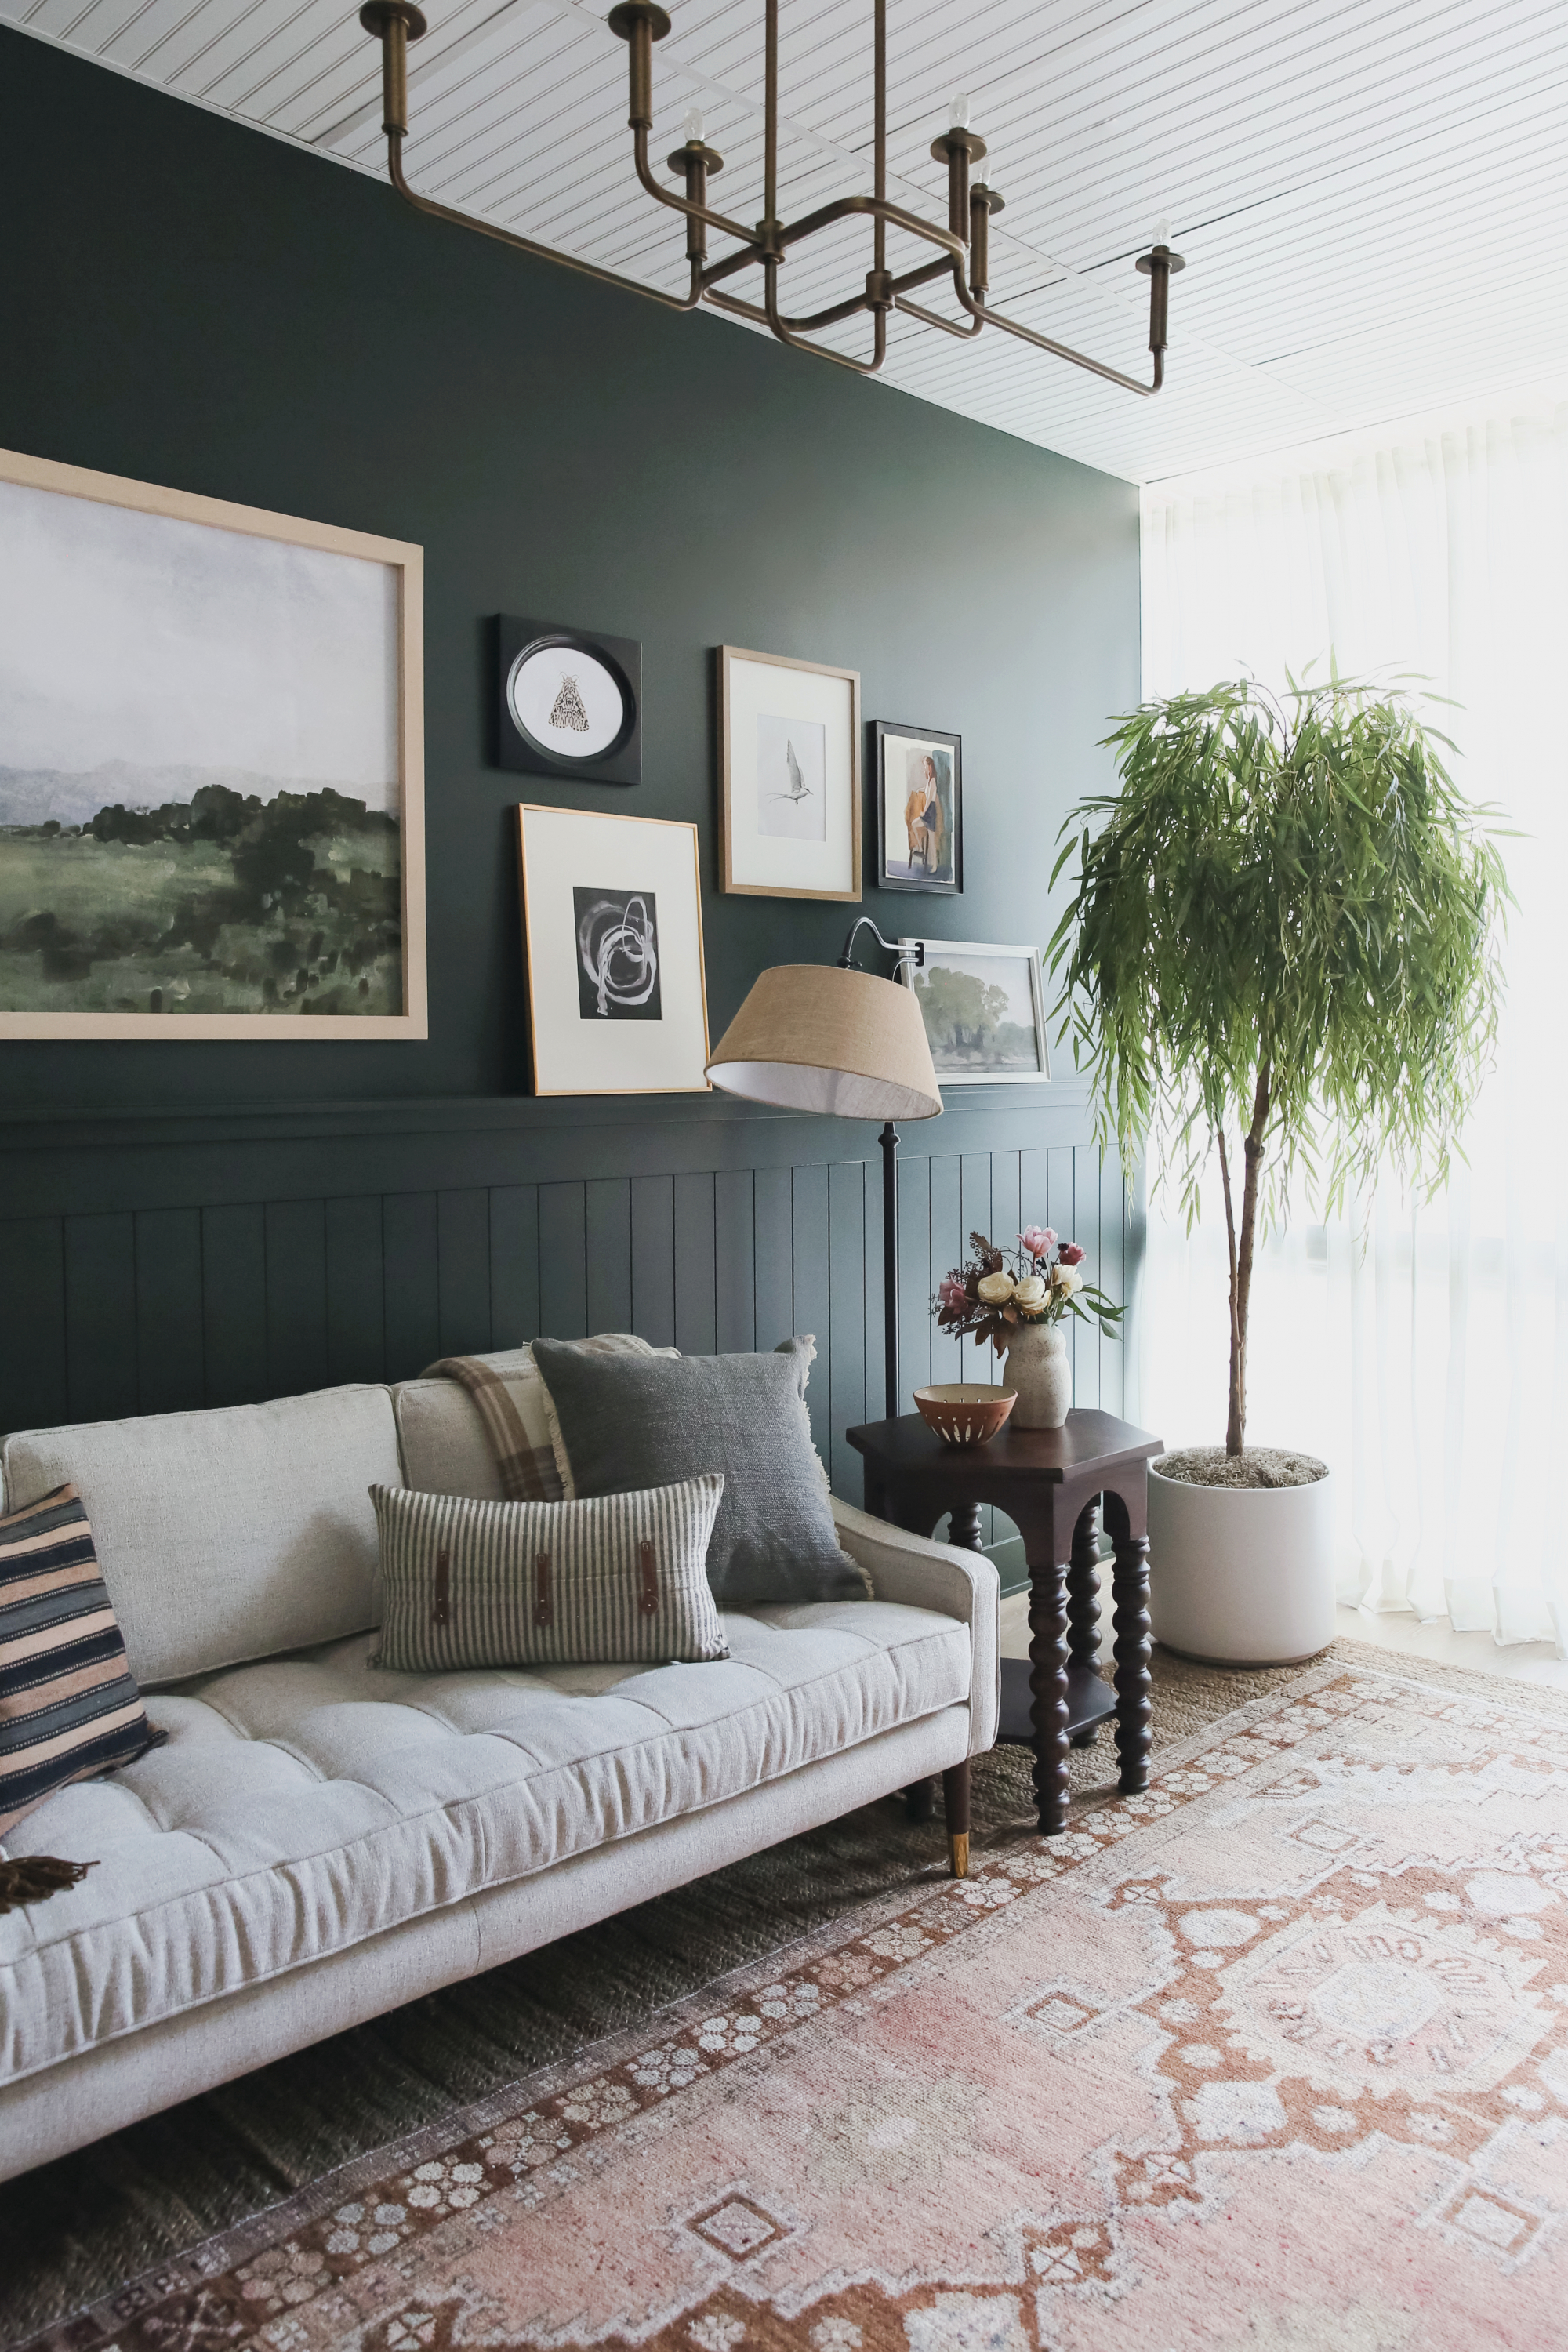 Elevating the Look of a Faux Tree or Plant - A Pretty Fix